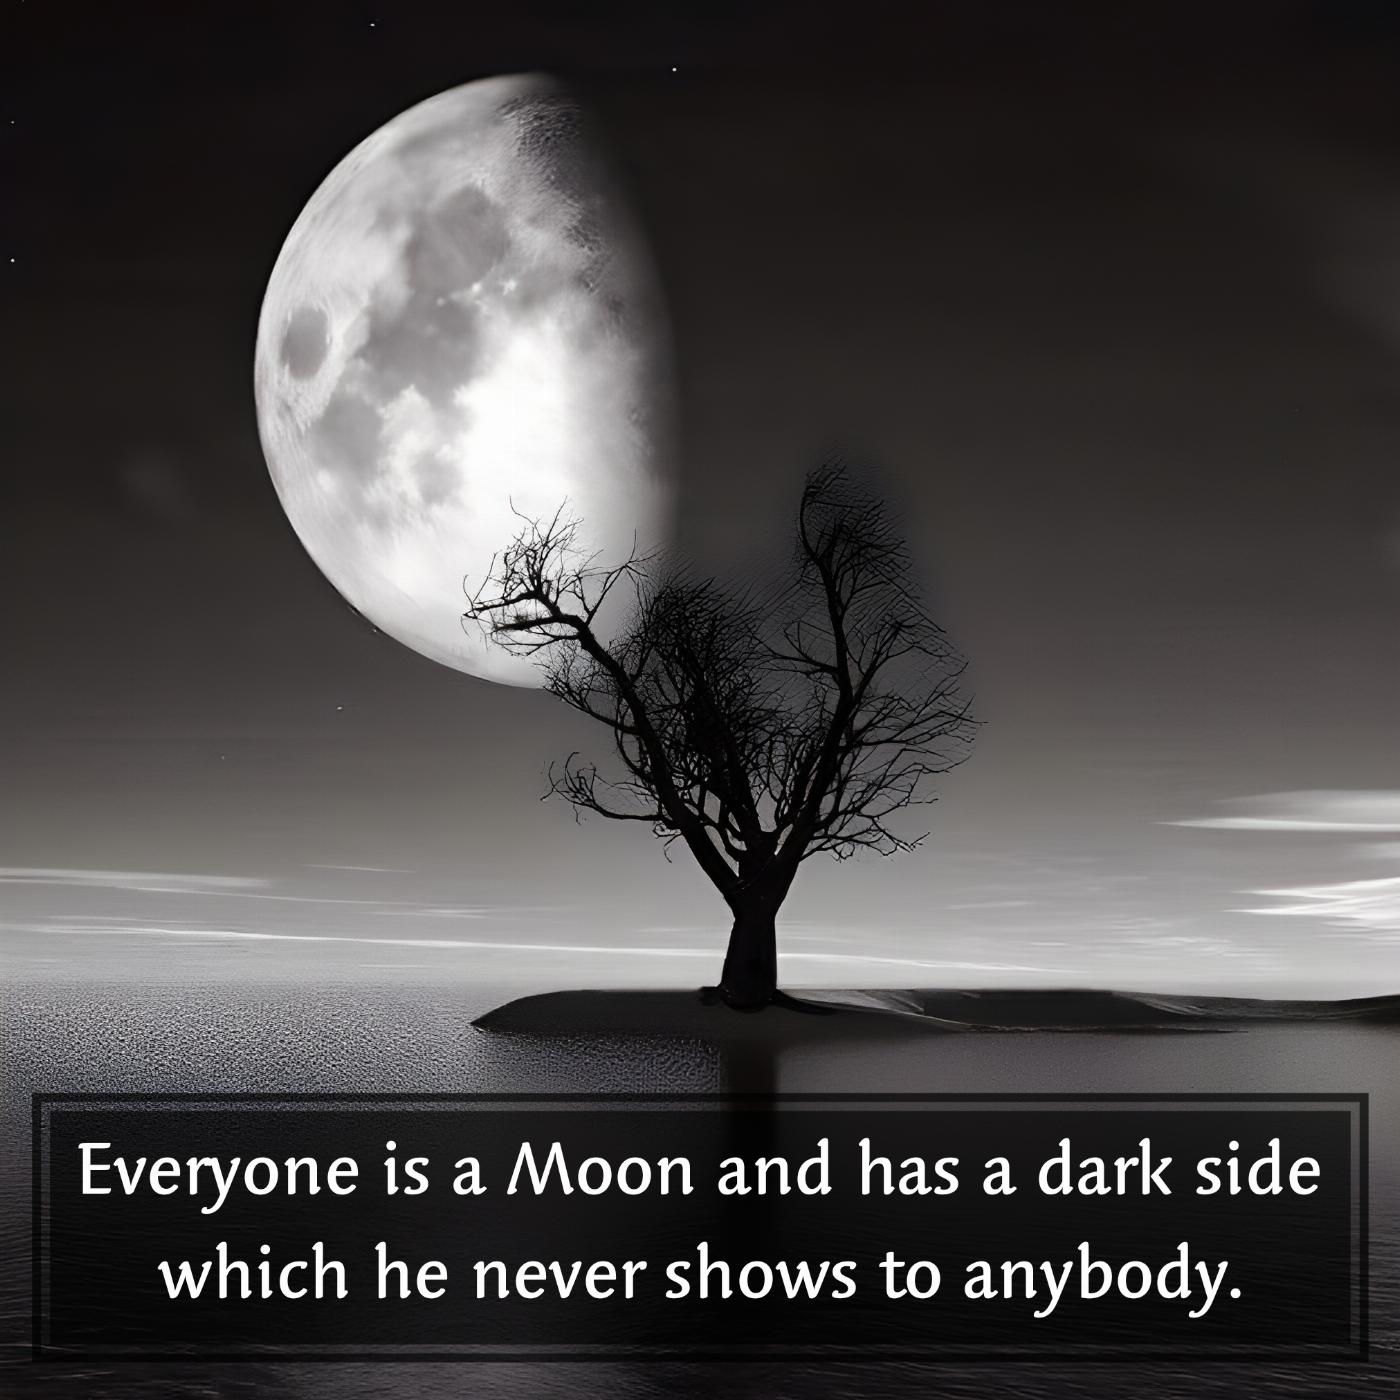 Everyone is a Moon and has a dark side